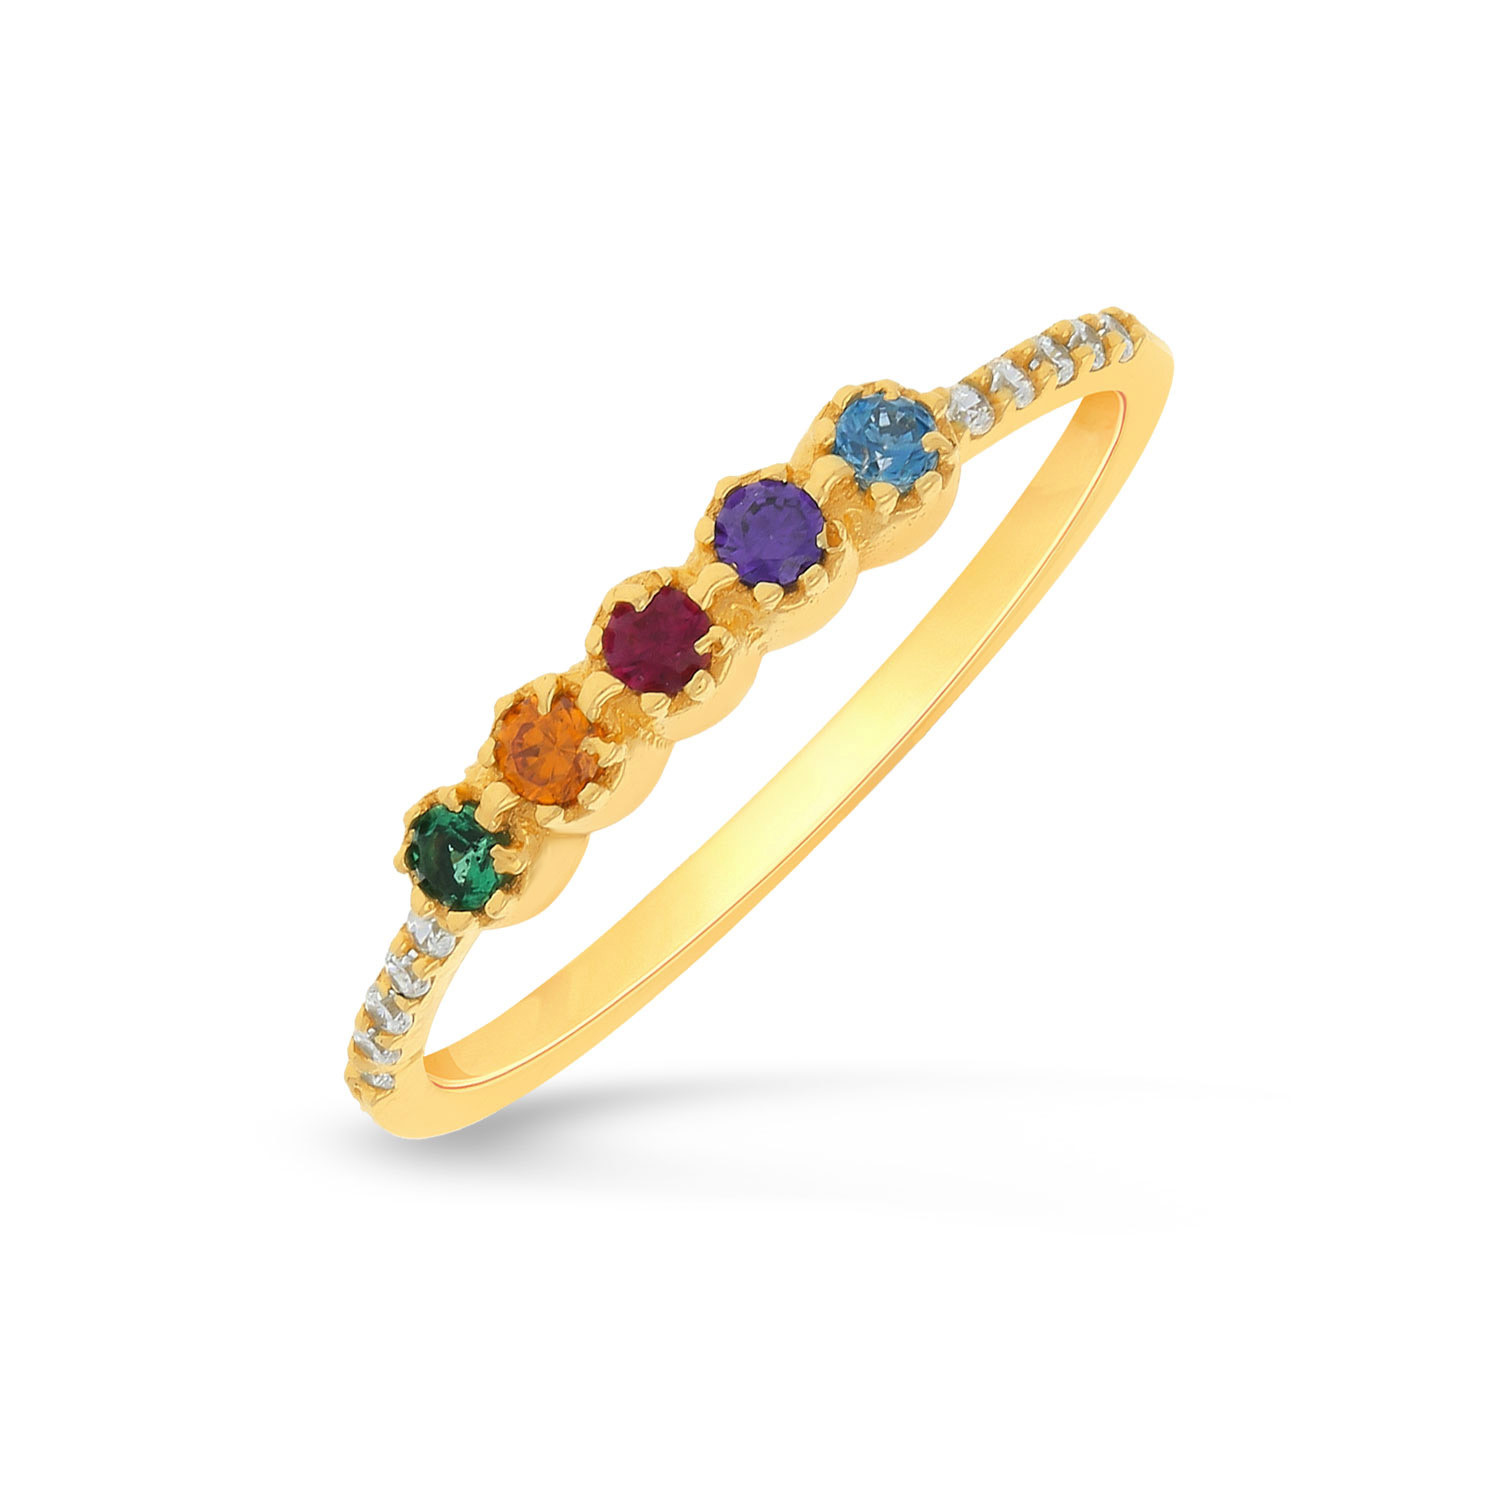 Malabar Gold and Diamonds 22KT Yellow Gold Ring for Women : Amazon.in:  Fashion